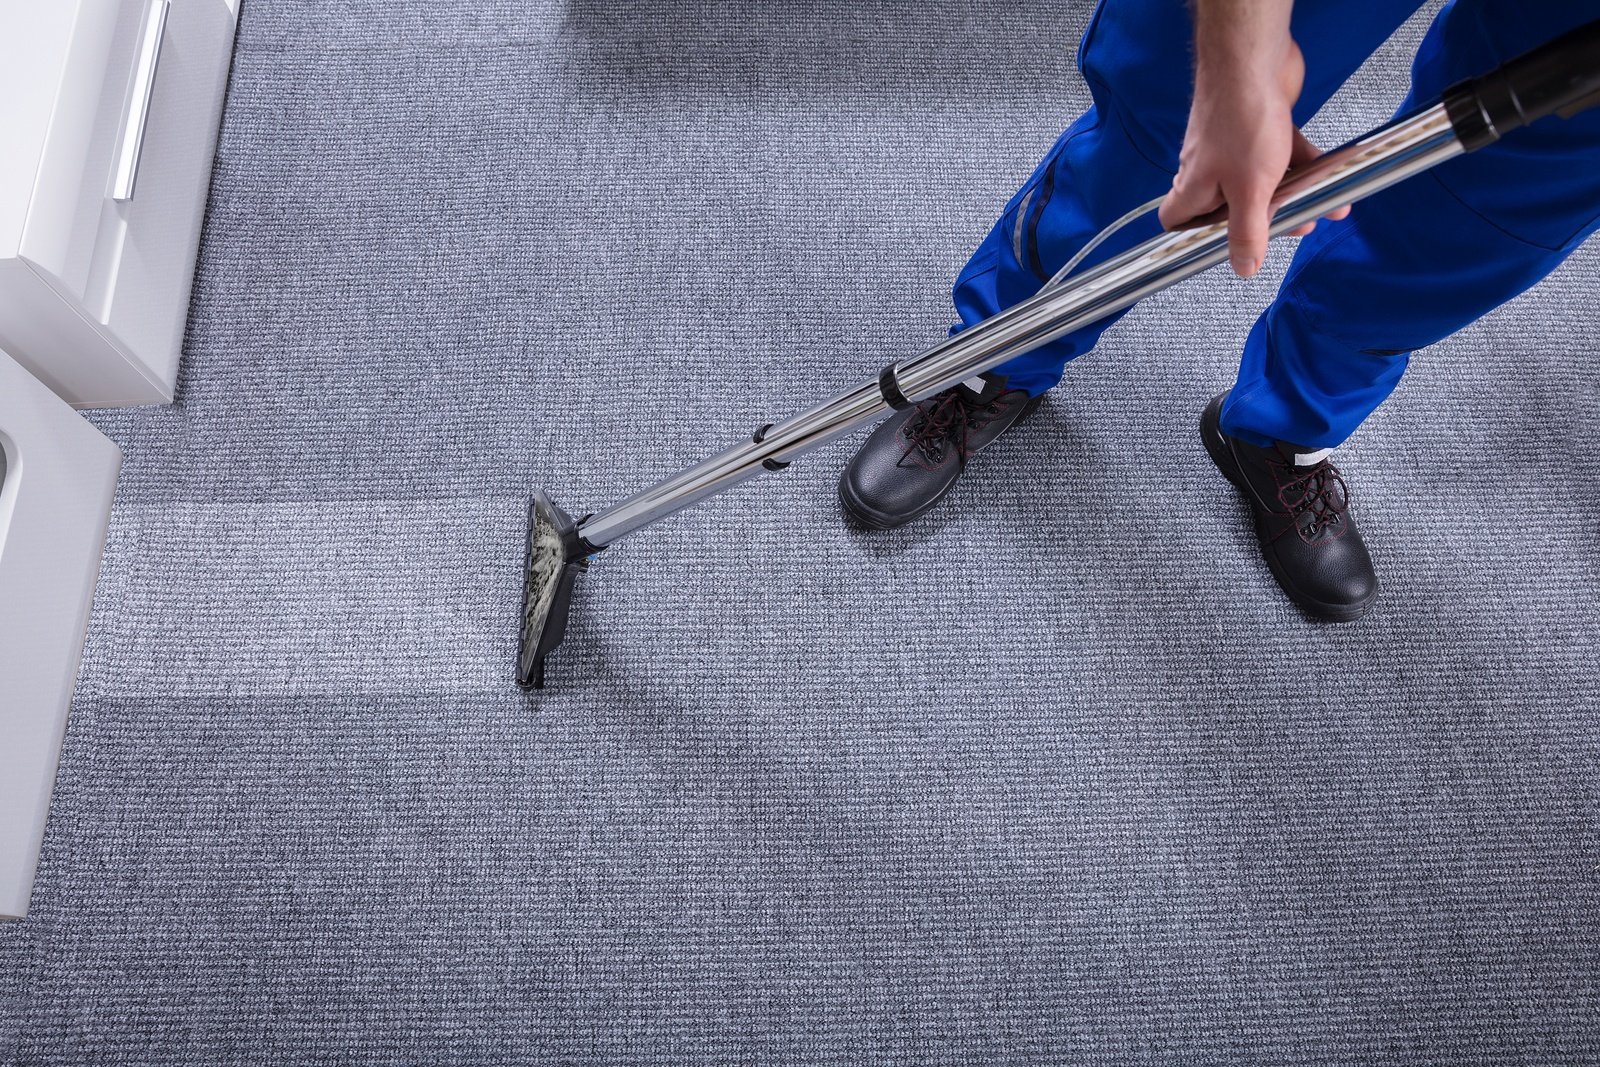 Which is the best method to clean your carpet?